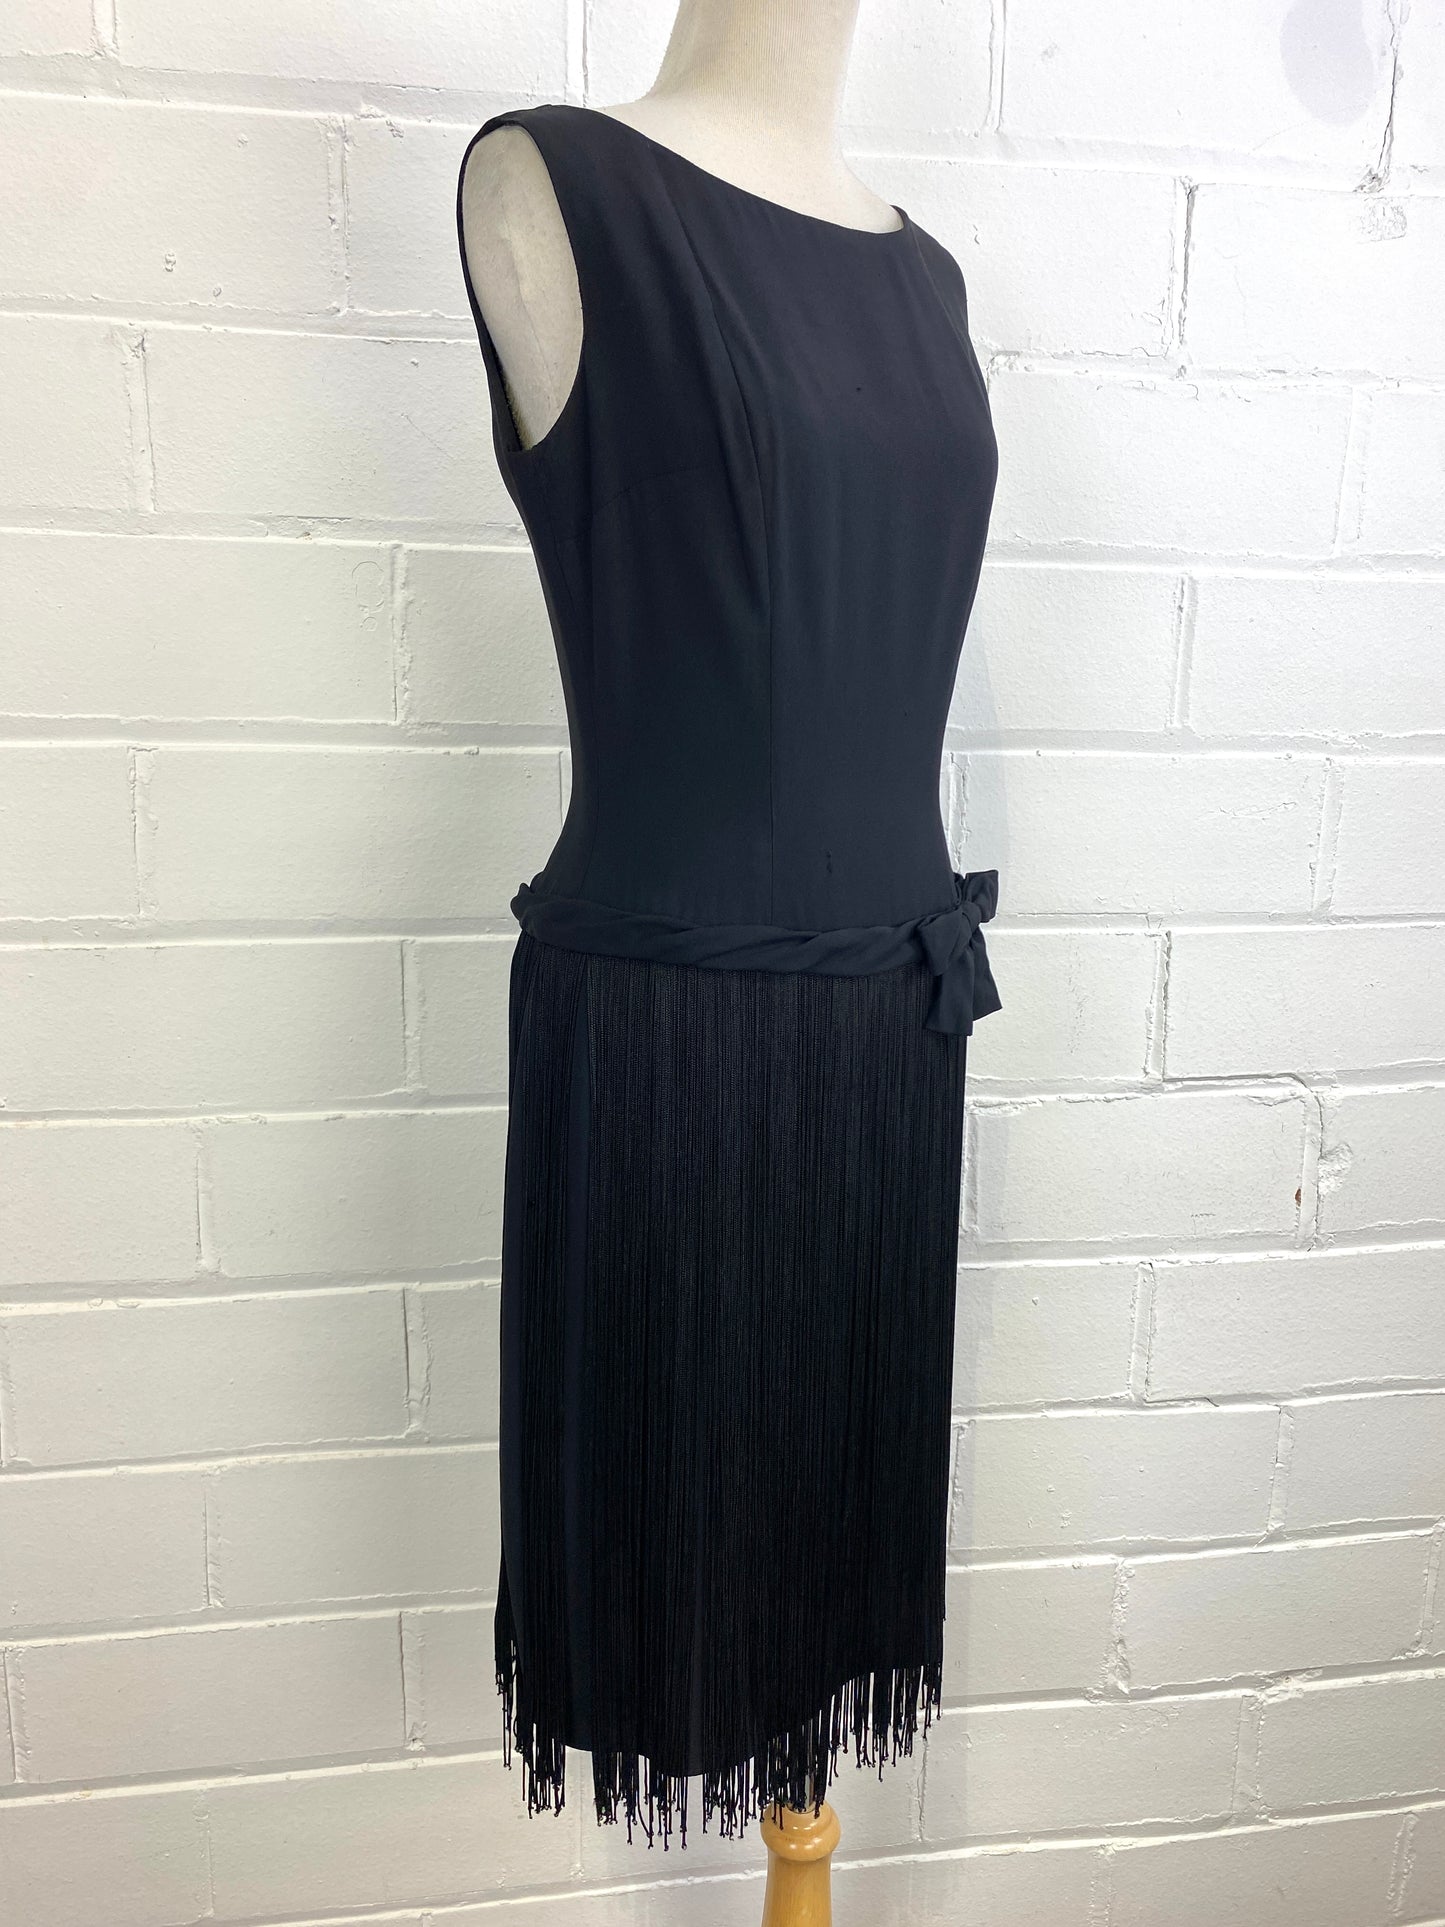 Vintage 1960s Does 20s Party Dress with Fringe Skirt & Waist Bow, Small